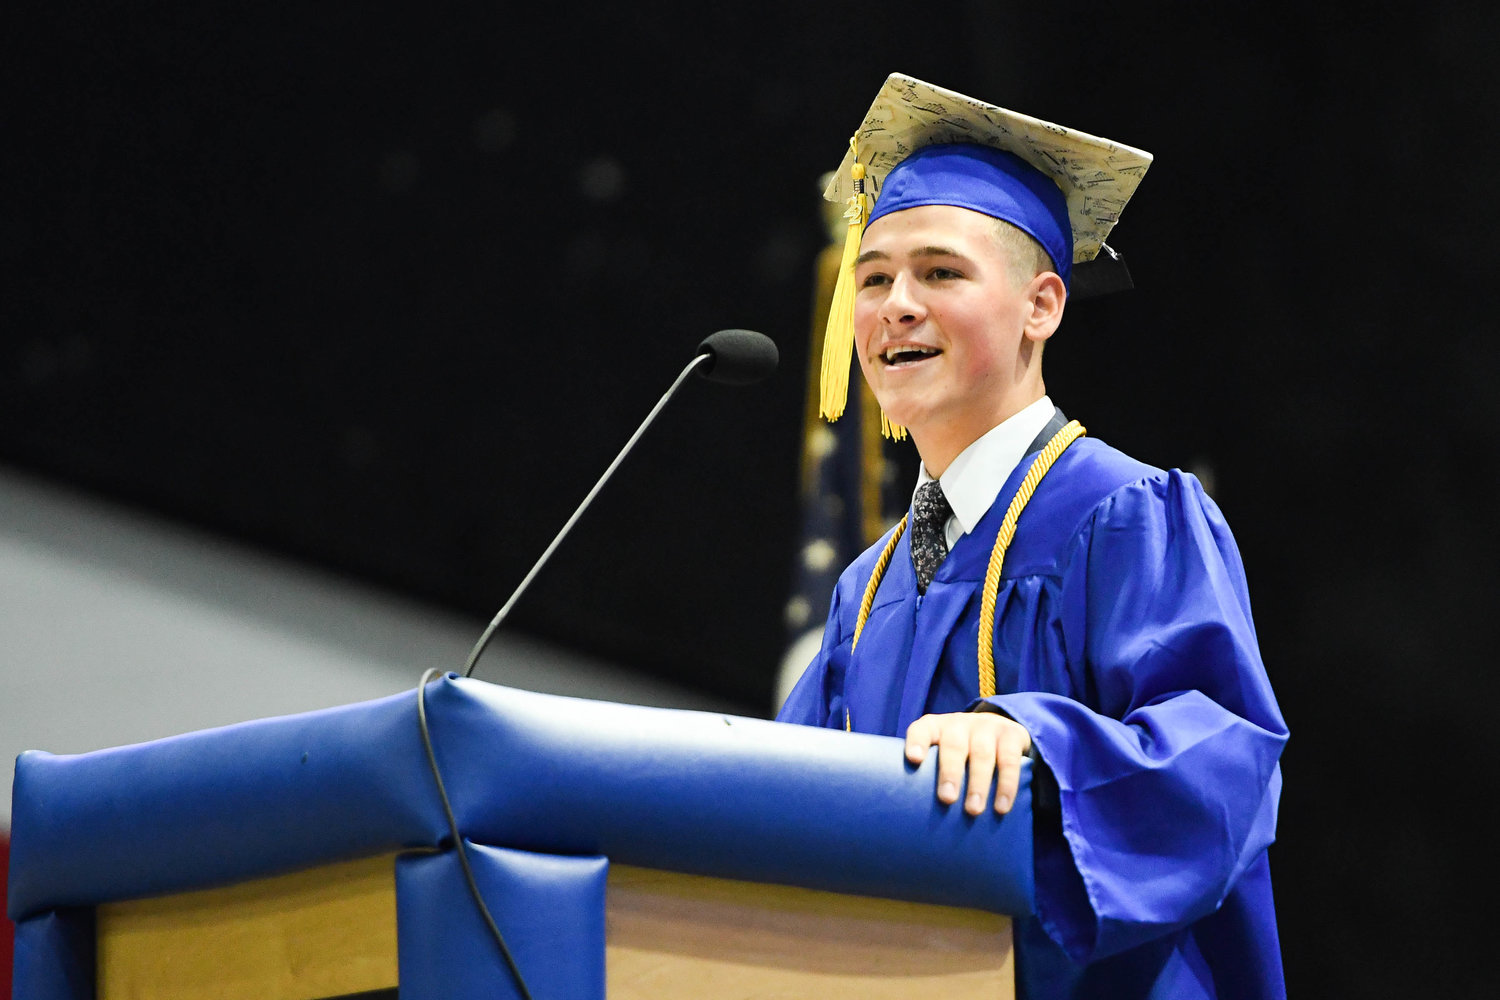 Senior Class President Carson Cook speaks during Whitesboro High School's 87th annual commencement ceremony for the class of 2022 on Saturday at the Adirondack Bank Center at the Utica Memorial Auditorium.